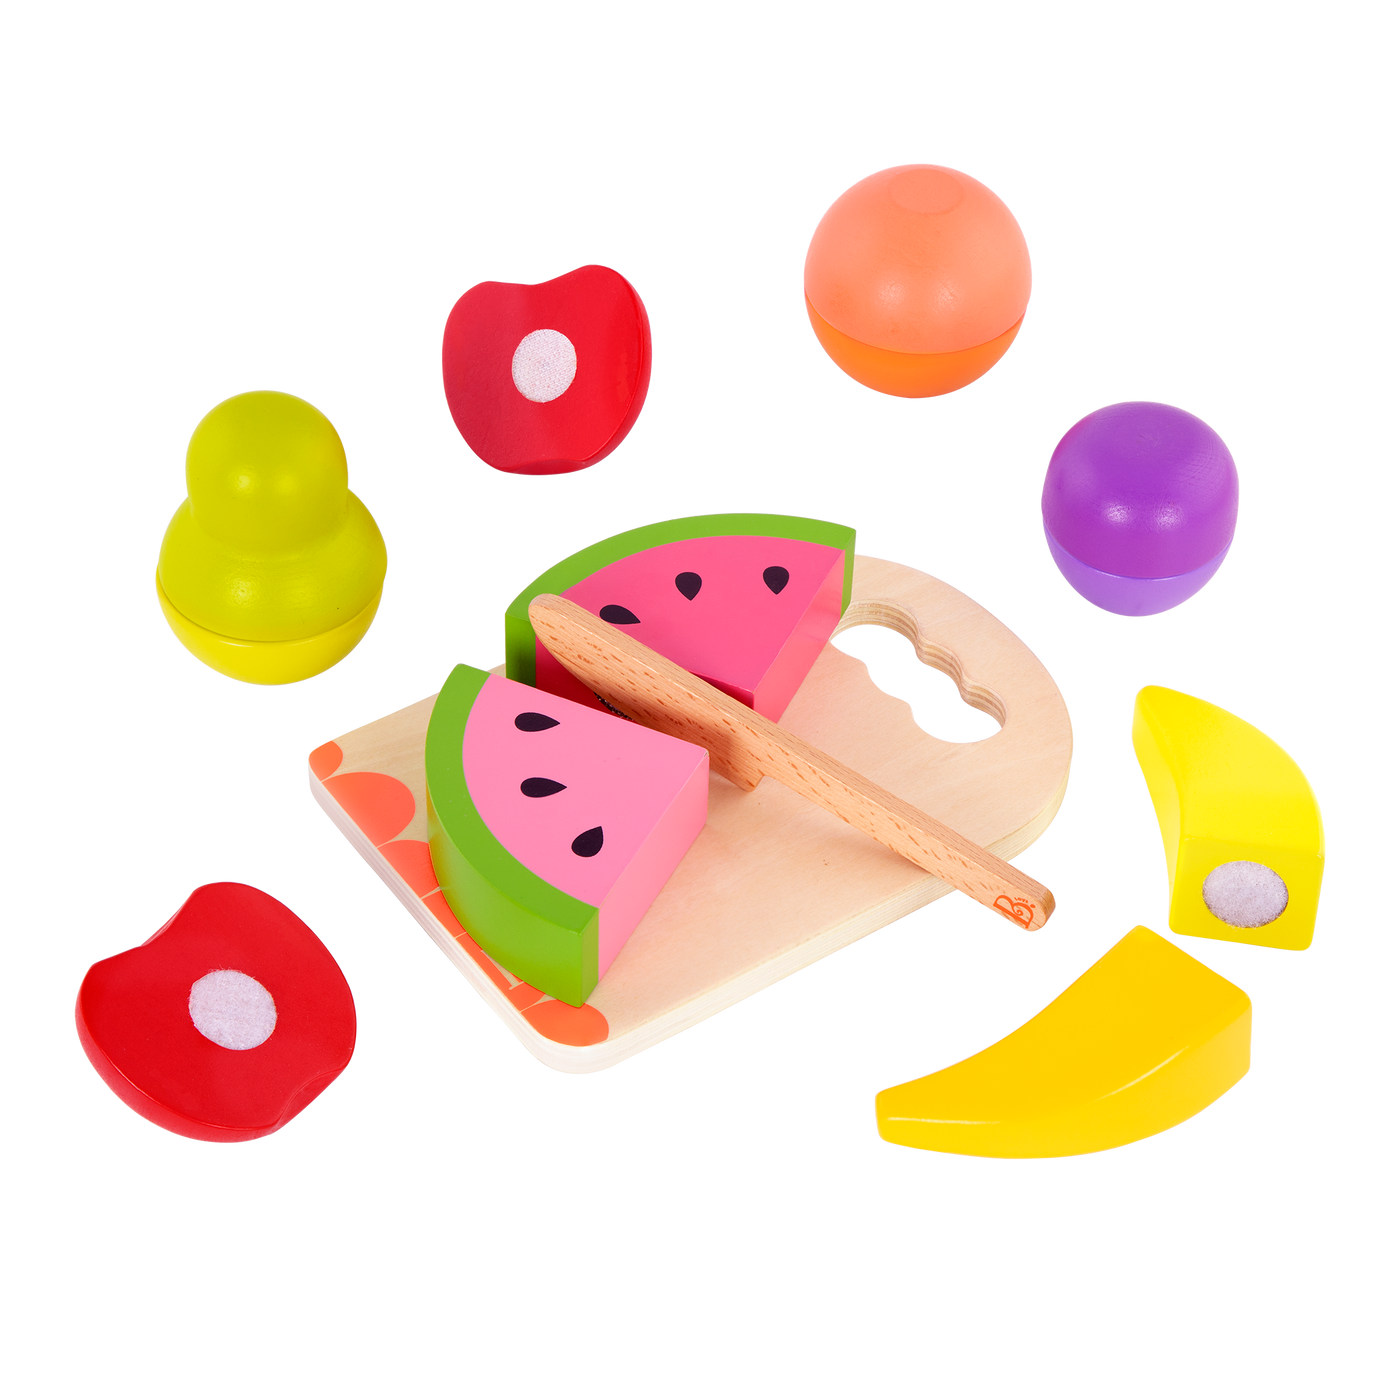 Wooden toy fruits.